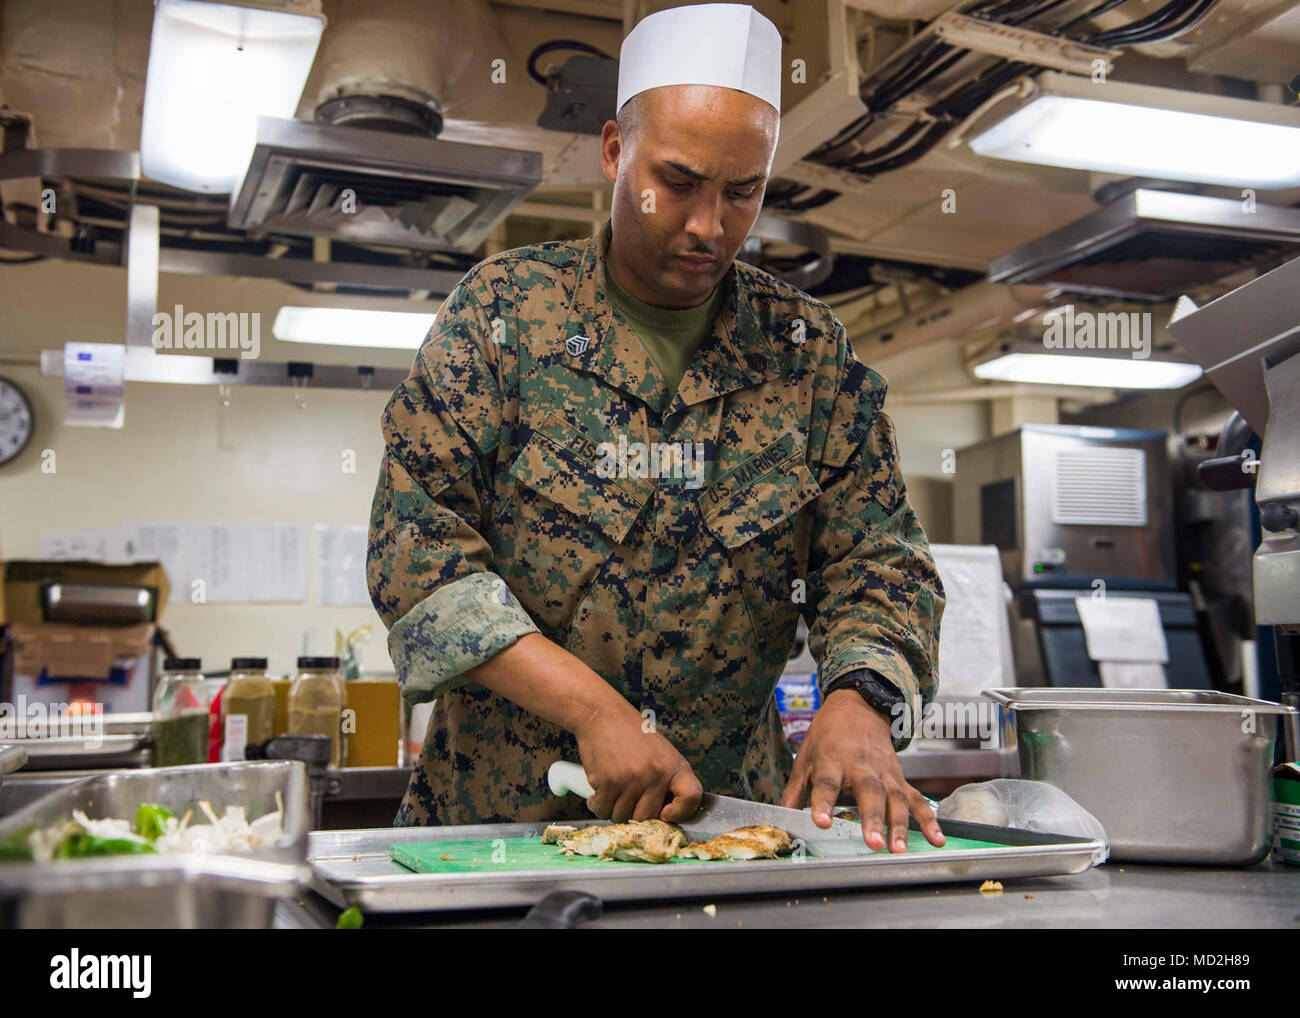 PHILIPPINE SEA (March 26, 2018) Staff Sgt. Arthur Fisher, from Manhattan, N.Y., dices up chicken for a meat and vegetable soup for dinner aboard the amphibious dock landing ship USS Ashland (LSD 48). Ashland, part of the Wasp Expeditionary Strike Group (ESG), with embarked 31st MEU, is operating in the Indo-Pacific region to enhance interoperability with partners, serve as a ready-response force for any type of contingency, and advance the Up-Gunned ESG concept. Stock Photo